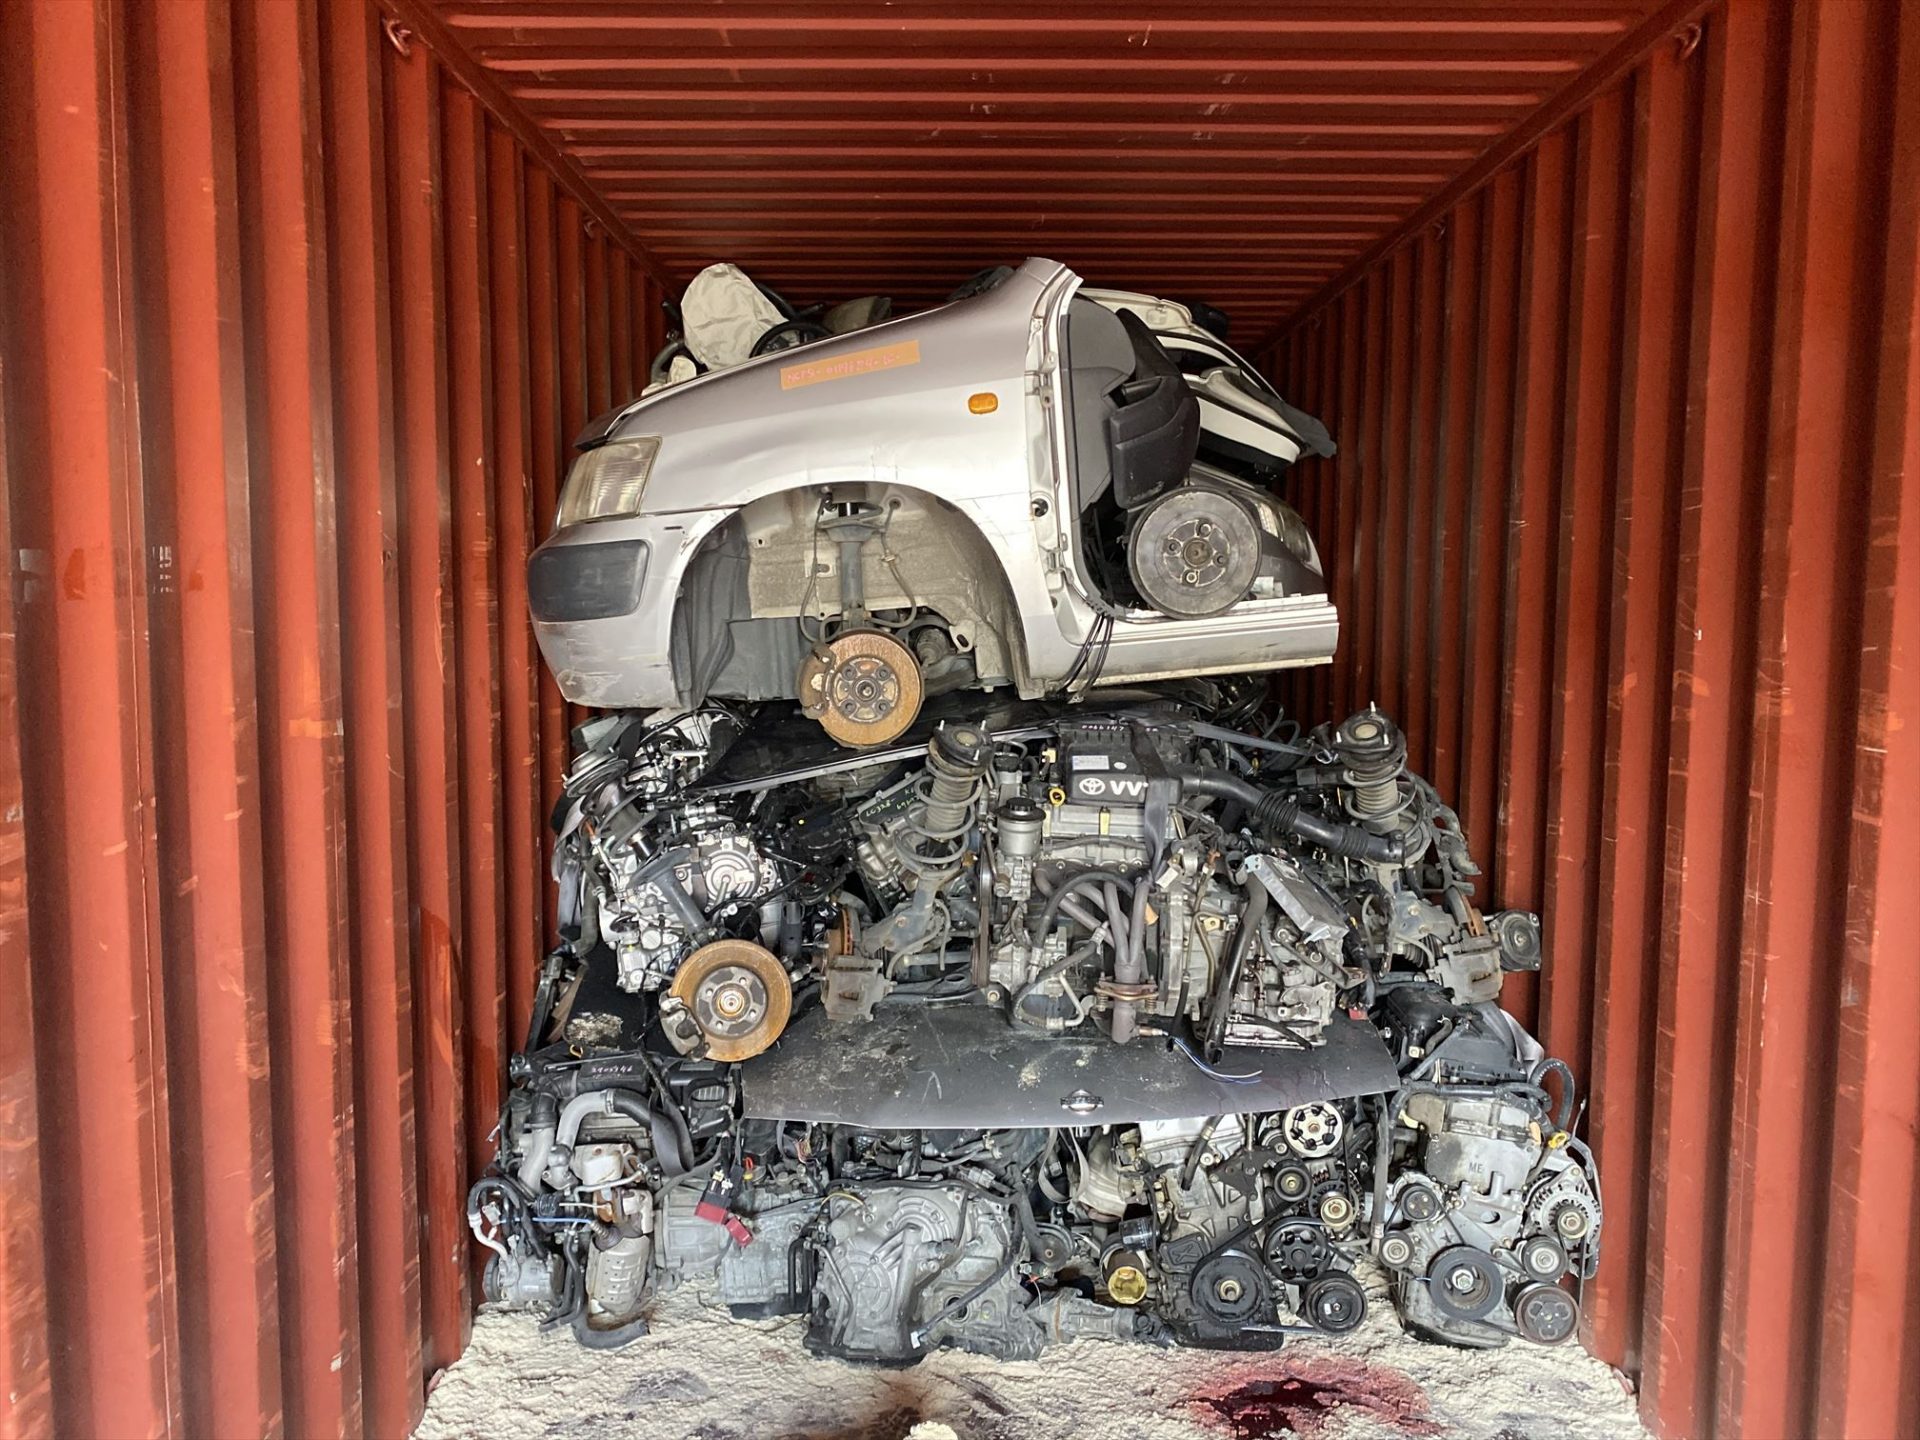 used parts japan,japan used car parts,used car parts,中古車部品輸出,中古自動車部品,used engine,japan used engine